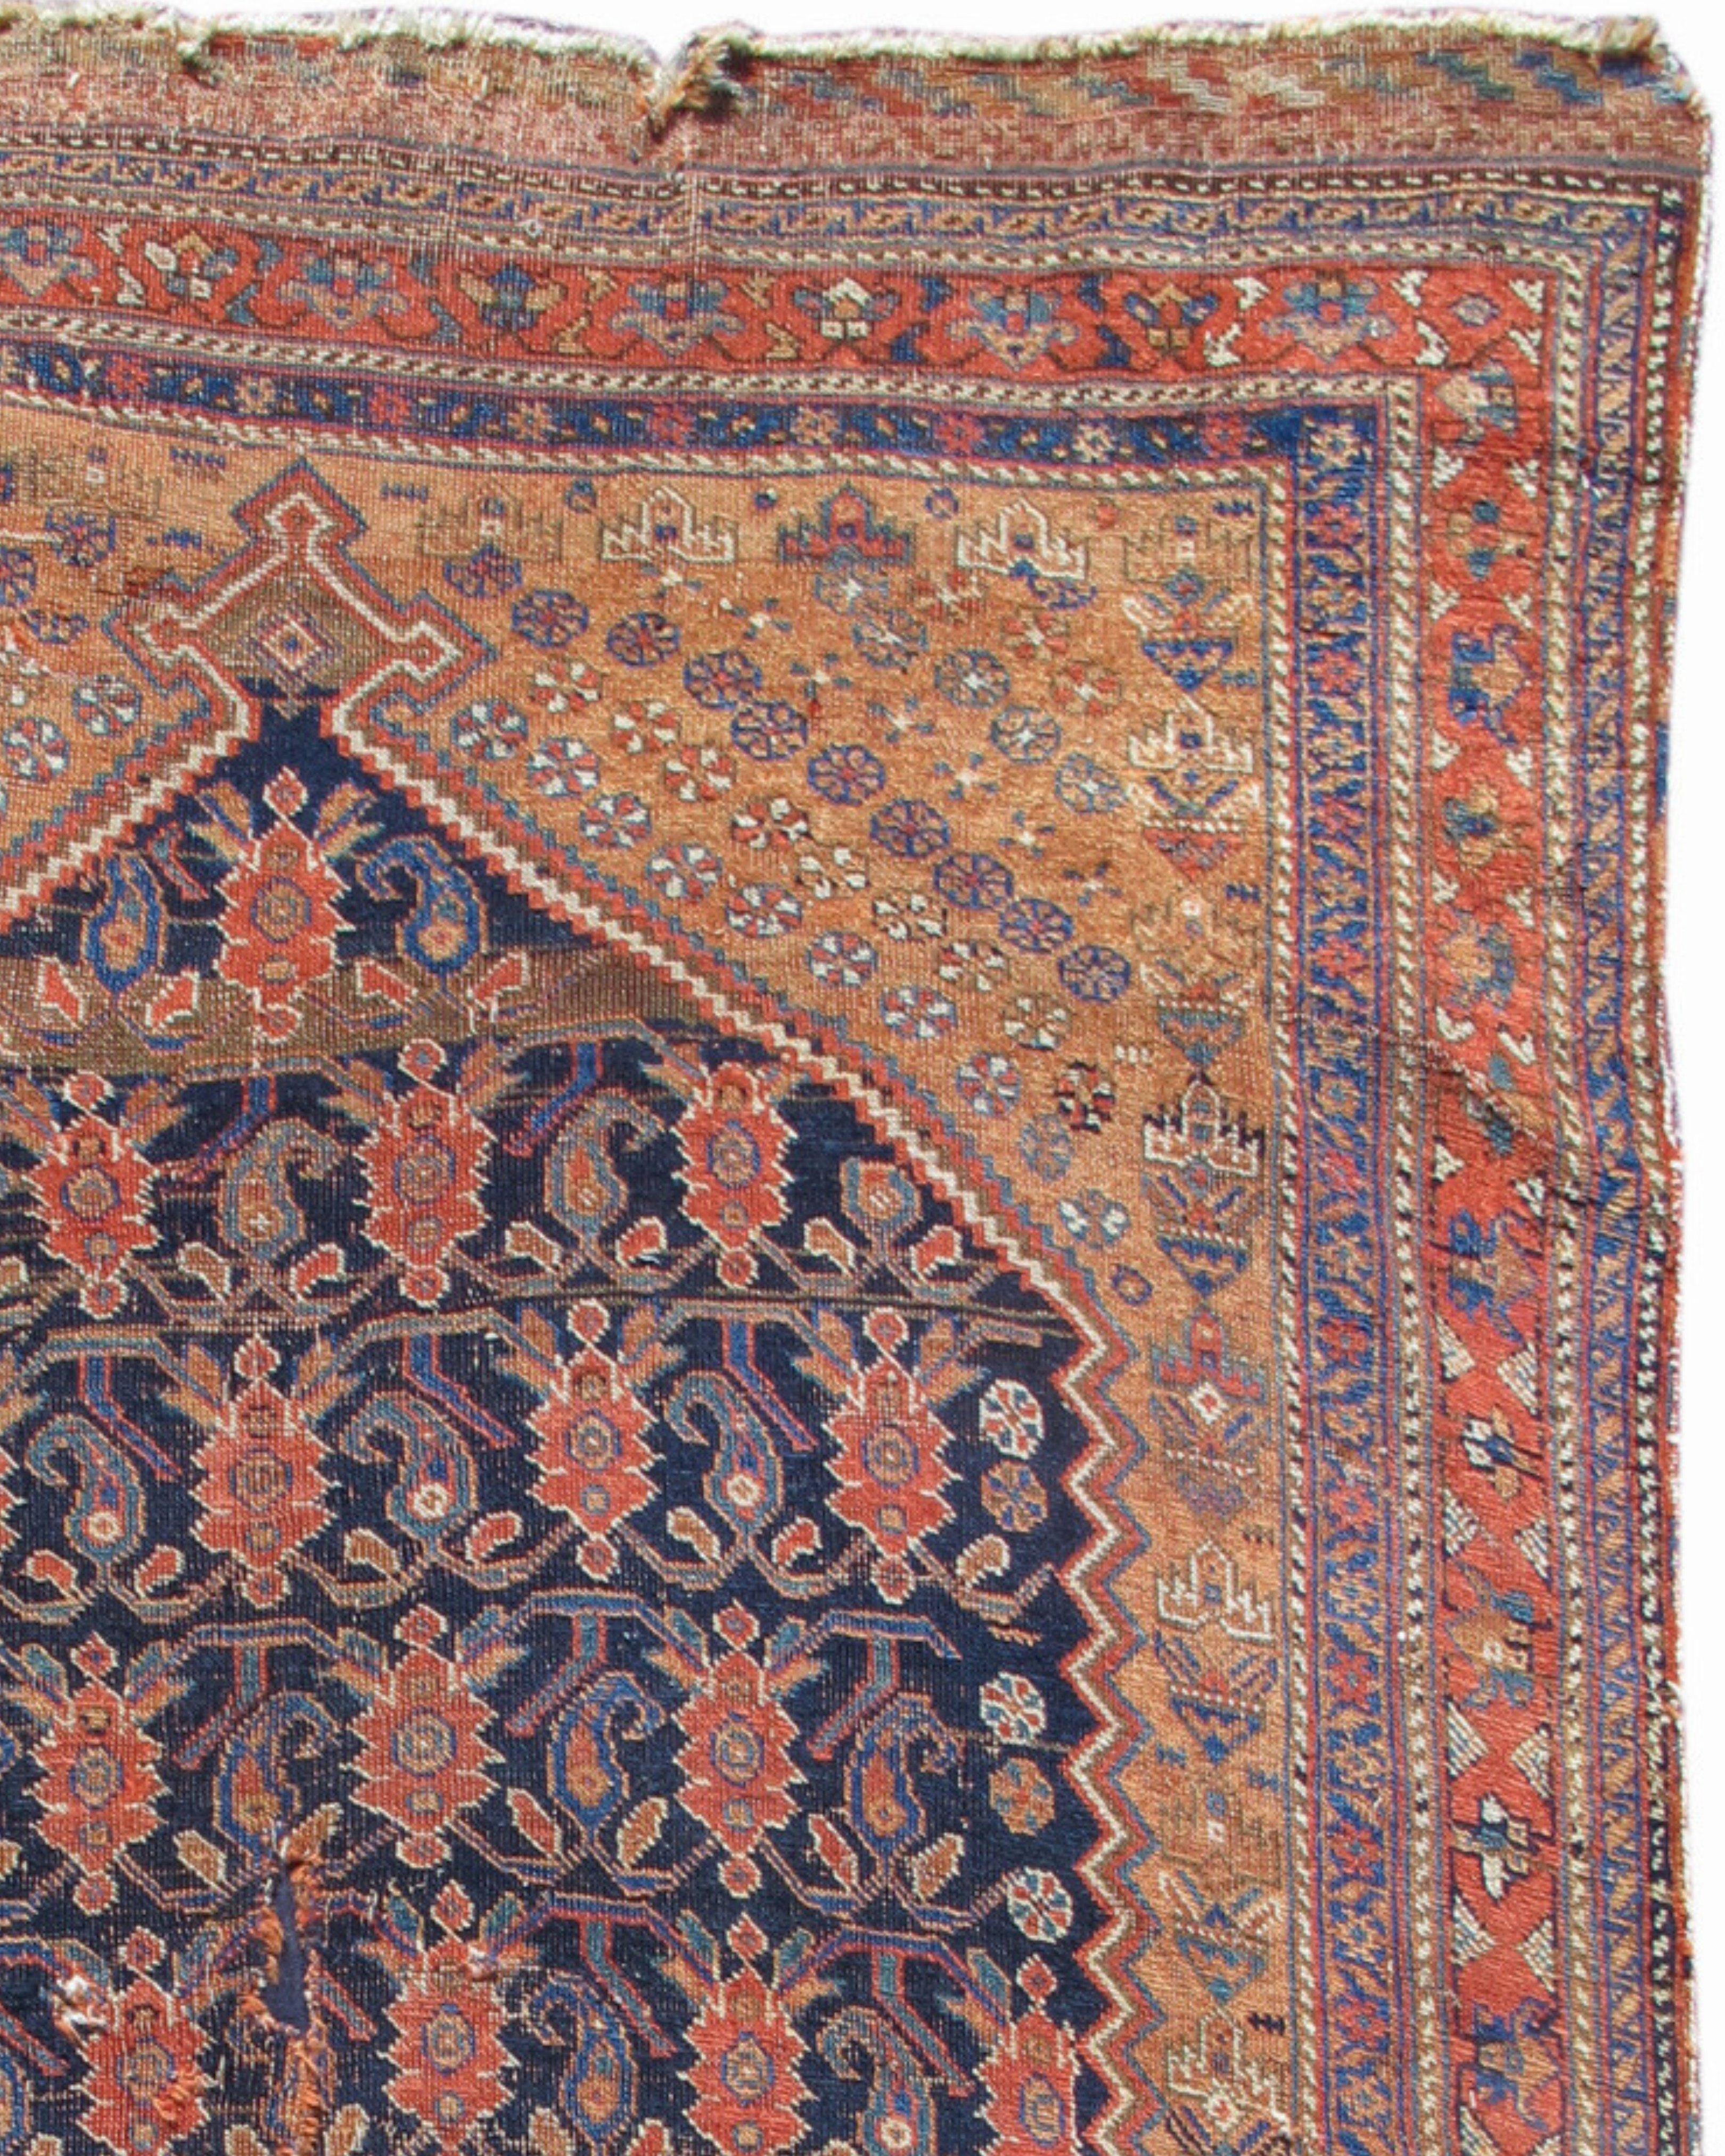 Antique Indian Red Afshar Rug, Late 19th Century

Collection of Mr. and Mrs. John Corwin.

Additional Information
Dimensions: 4'1